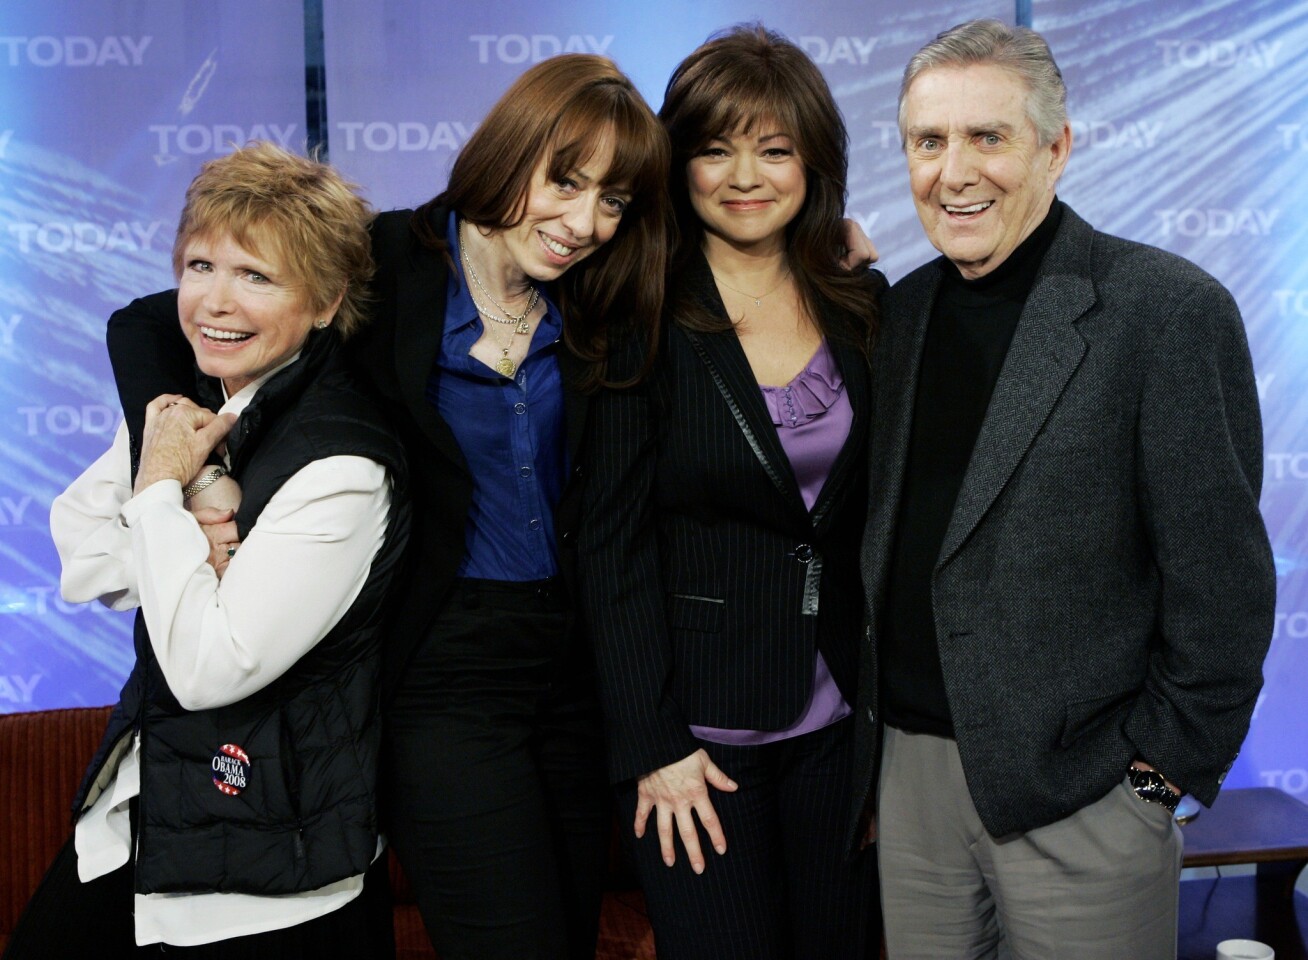 The stars of "One Day at a Time" reunited for an appearance on the "Today" show in 2008. From left: Bonnie Franklin, MacKenzie Phillips, Valerie Bertinelli and Pat Harrington Jr.